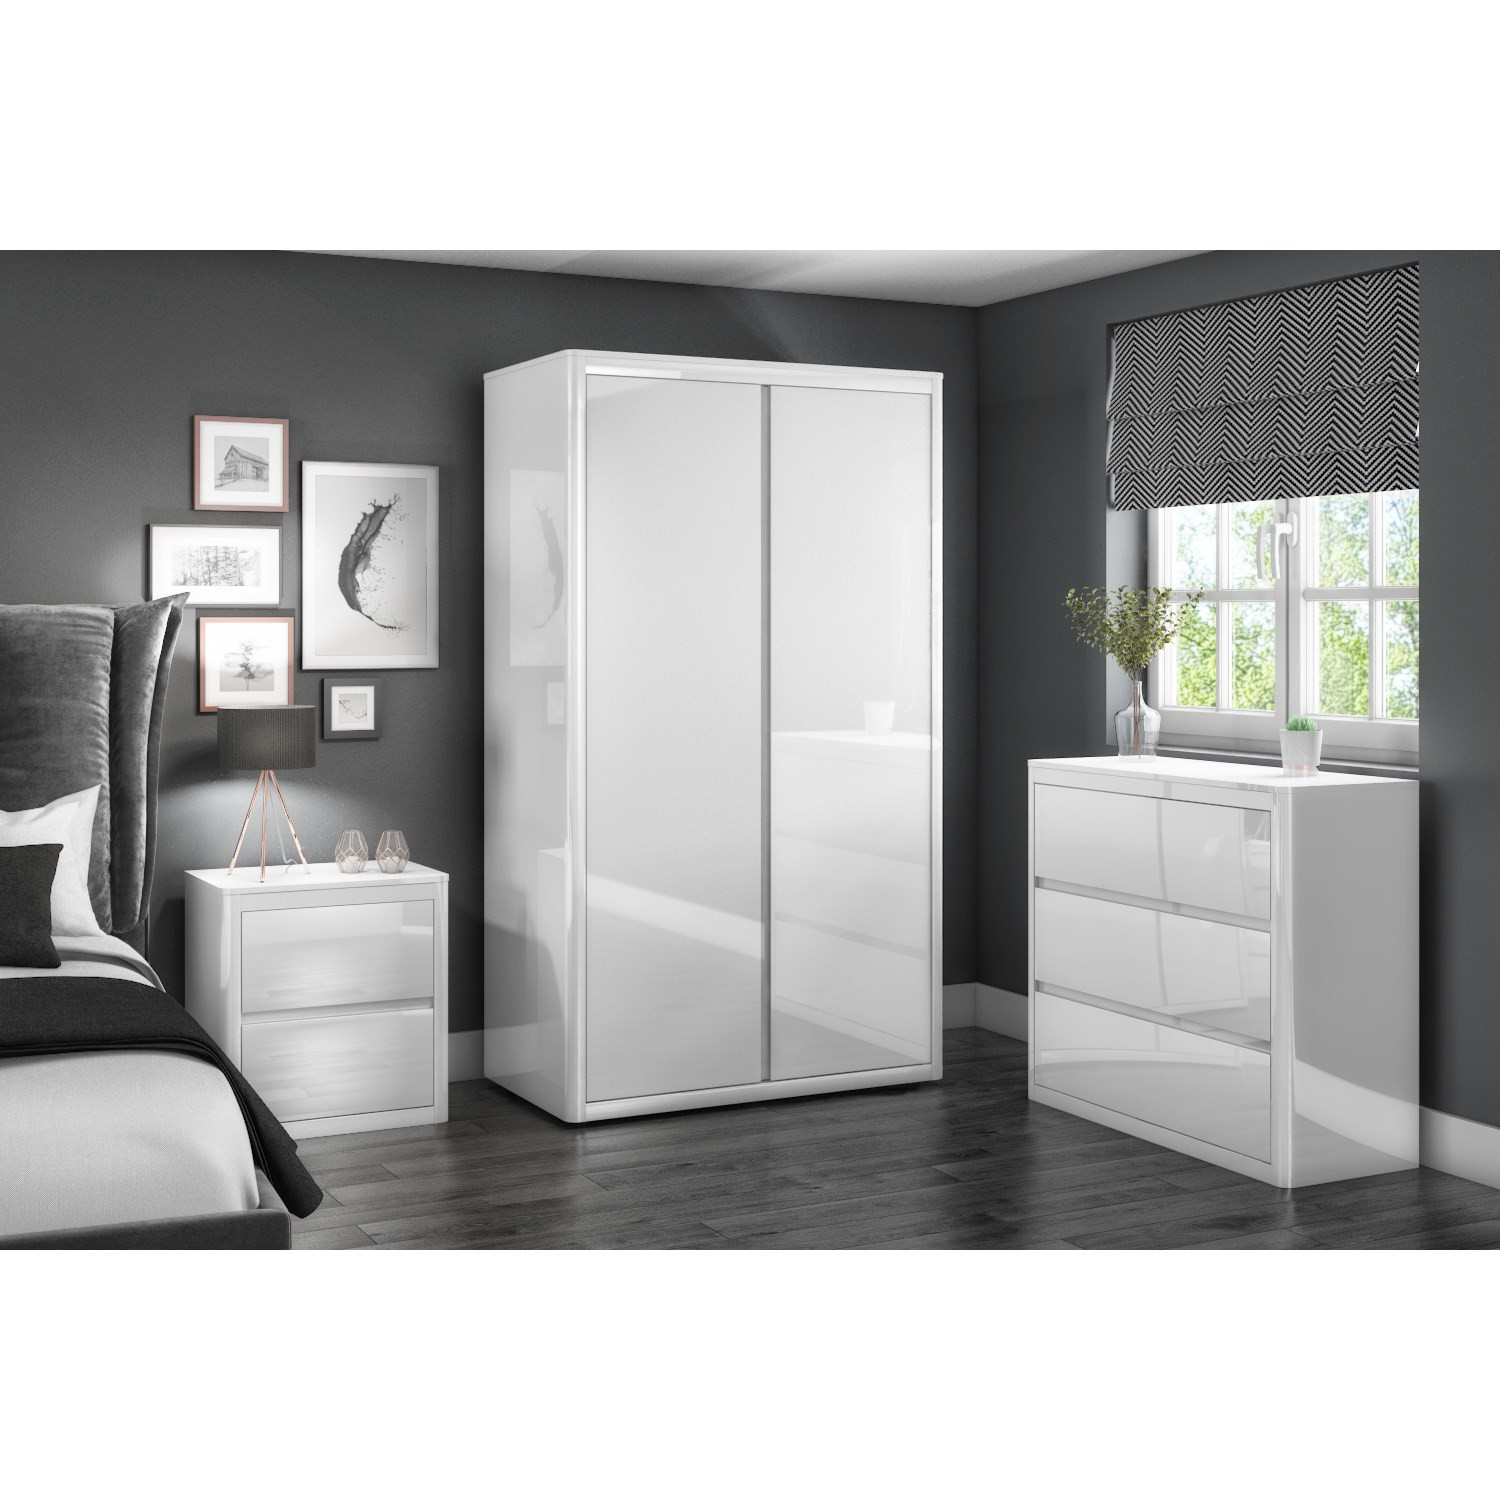 White Bedroom Cabinet
 White High Gloss Wide Chest of Drawers 3 Drawer Bedside